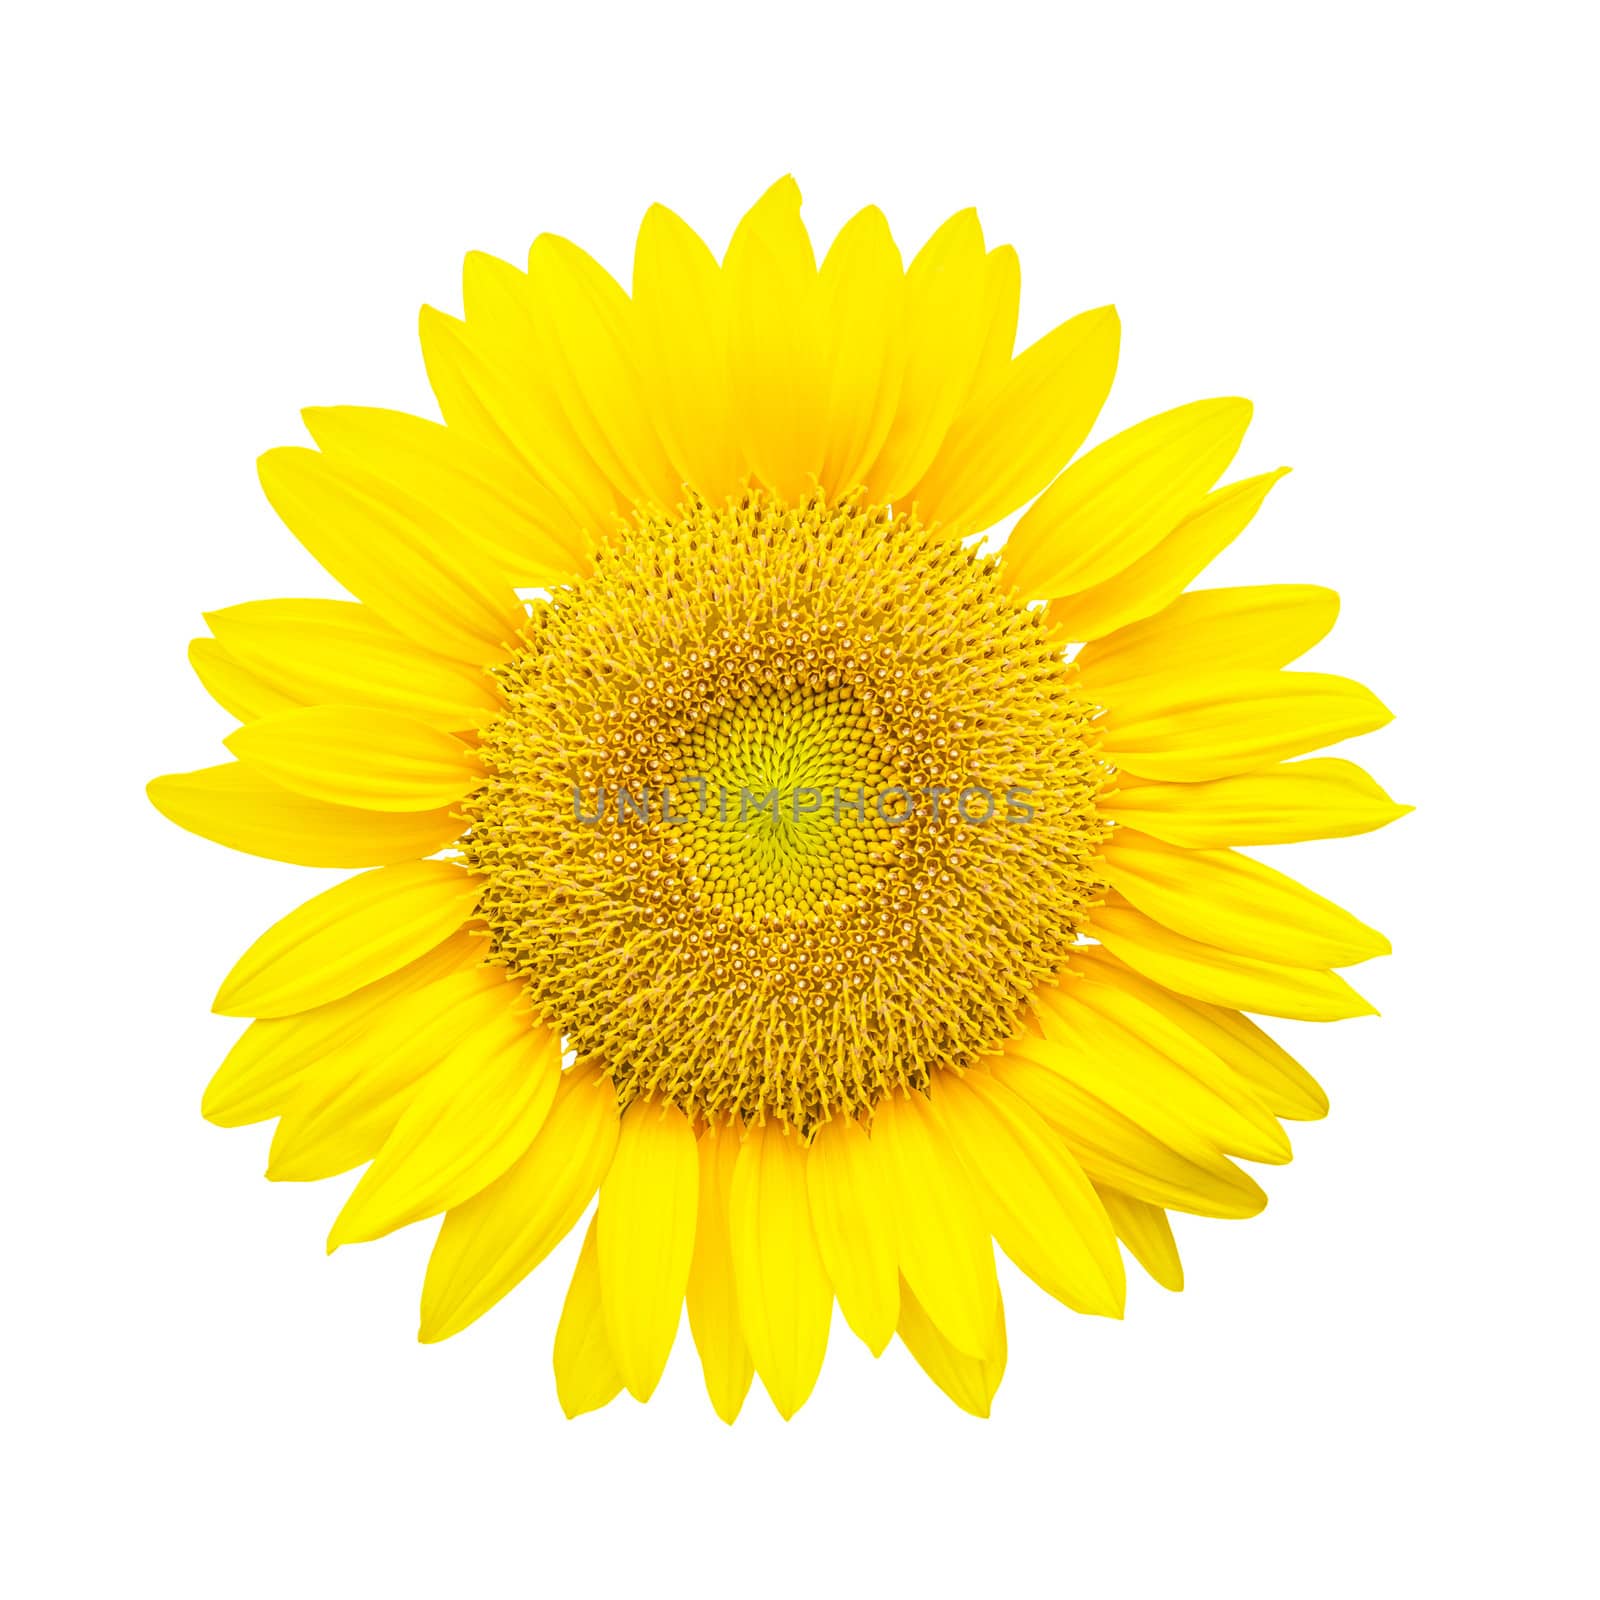 sunflower isolated on white background by FrameAngel